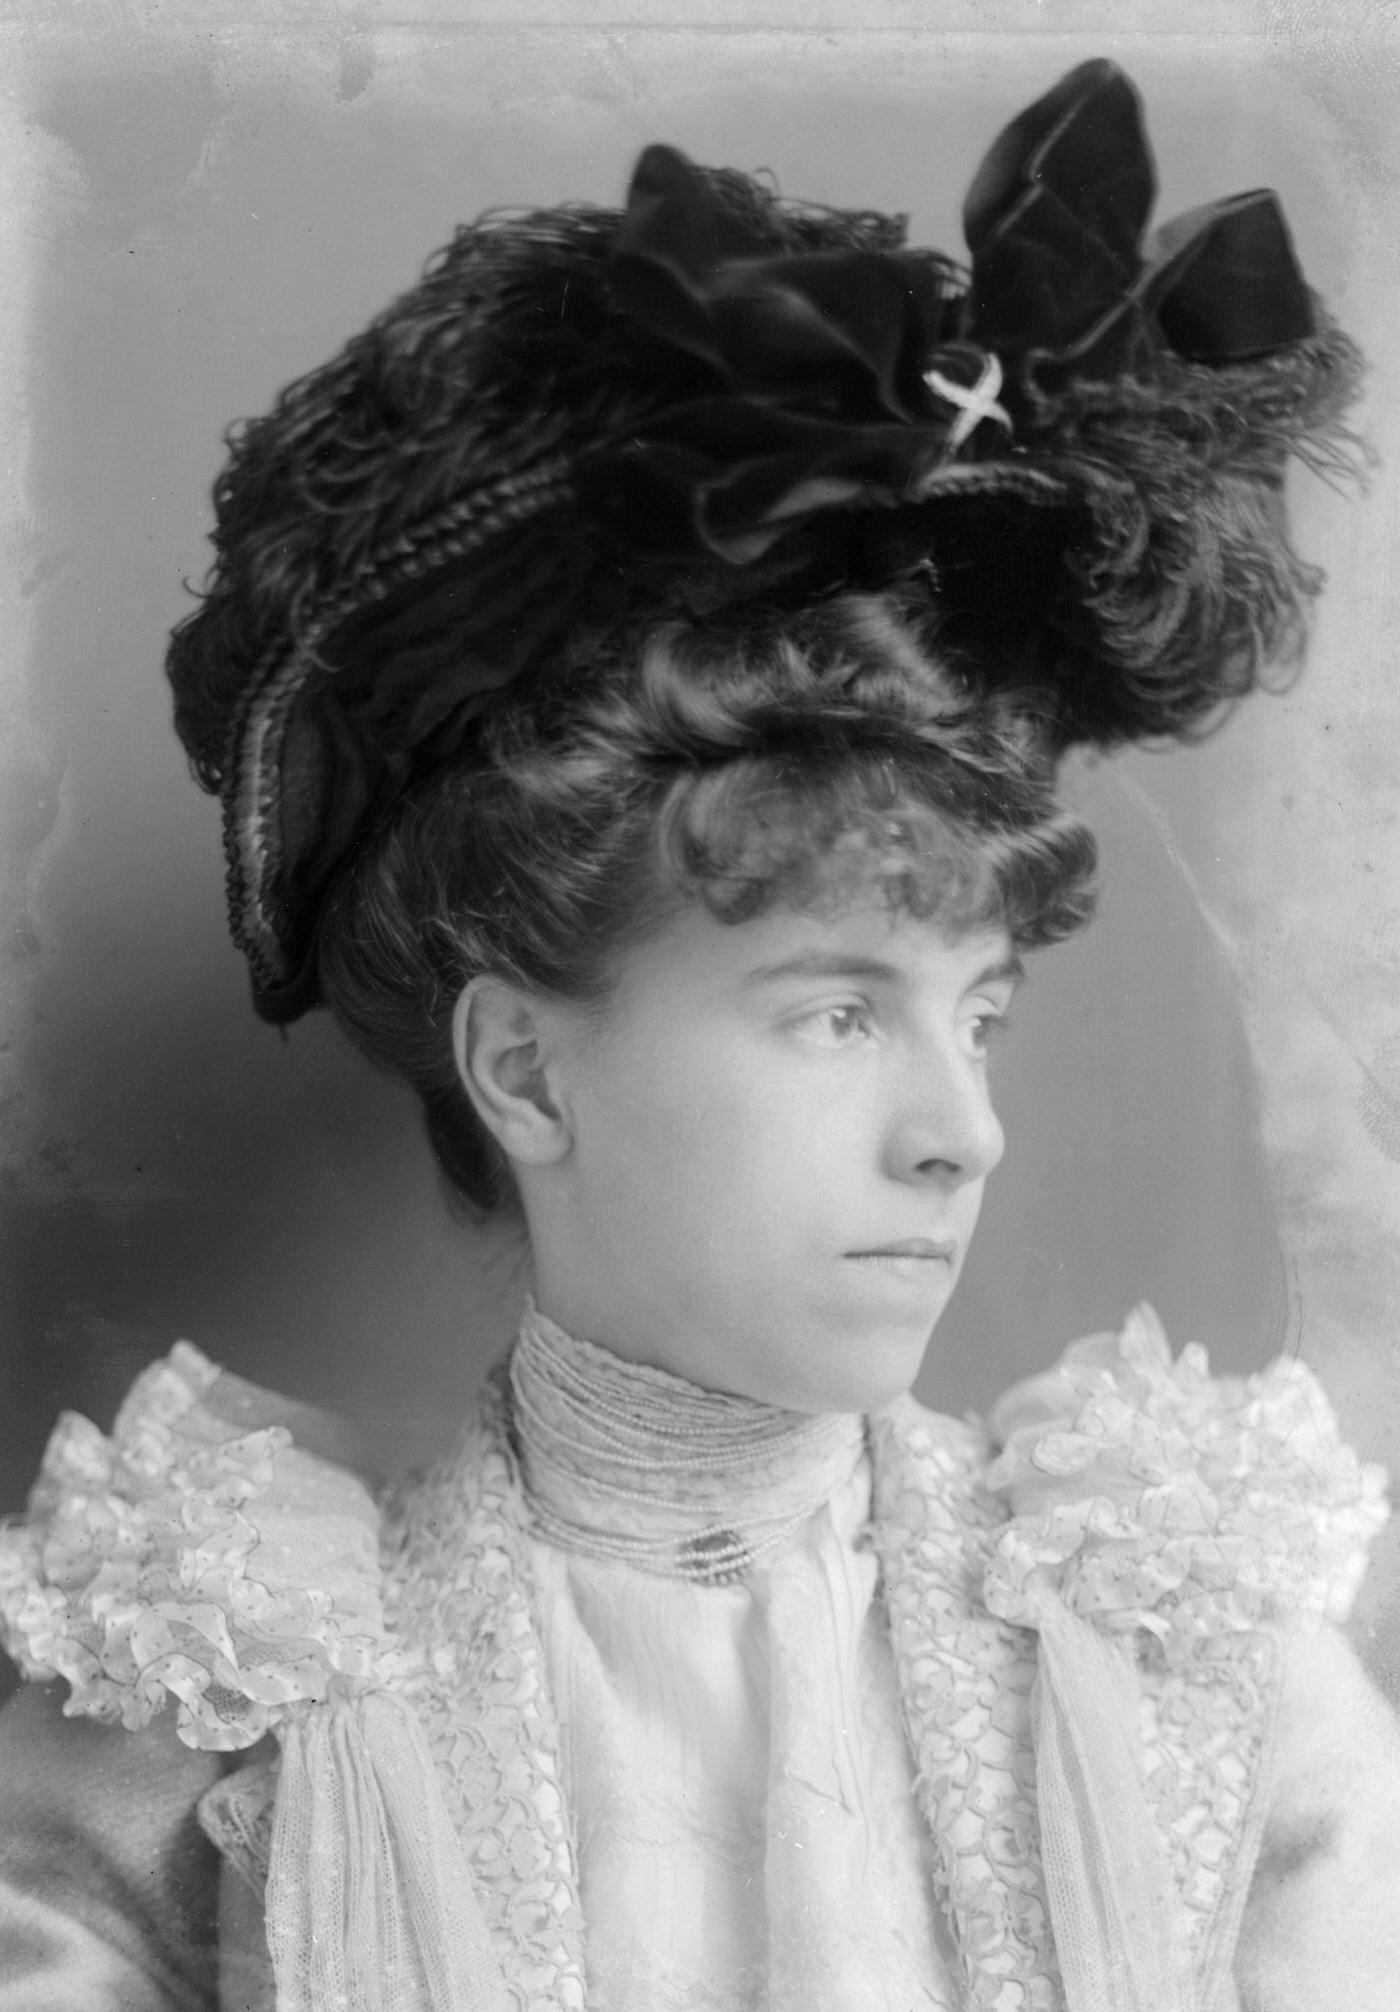 An Edwardian woman looks stunning in an ostrich feather hat in 1903